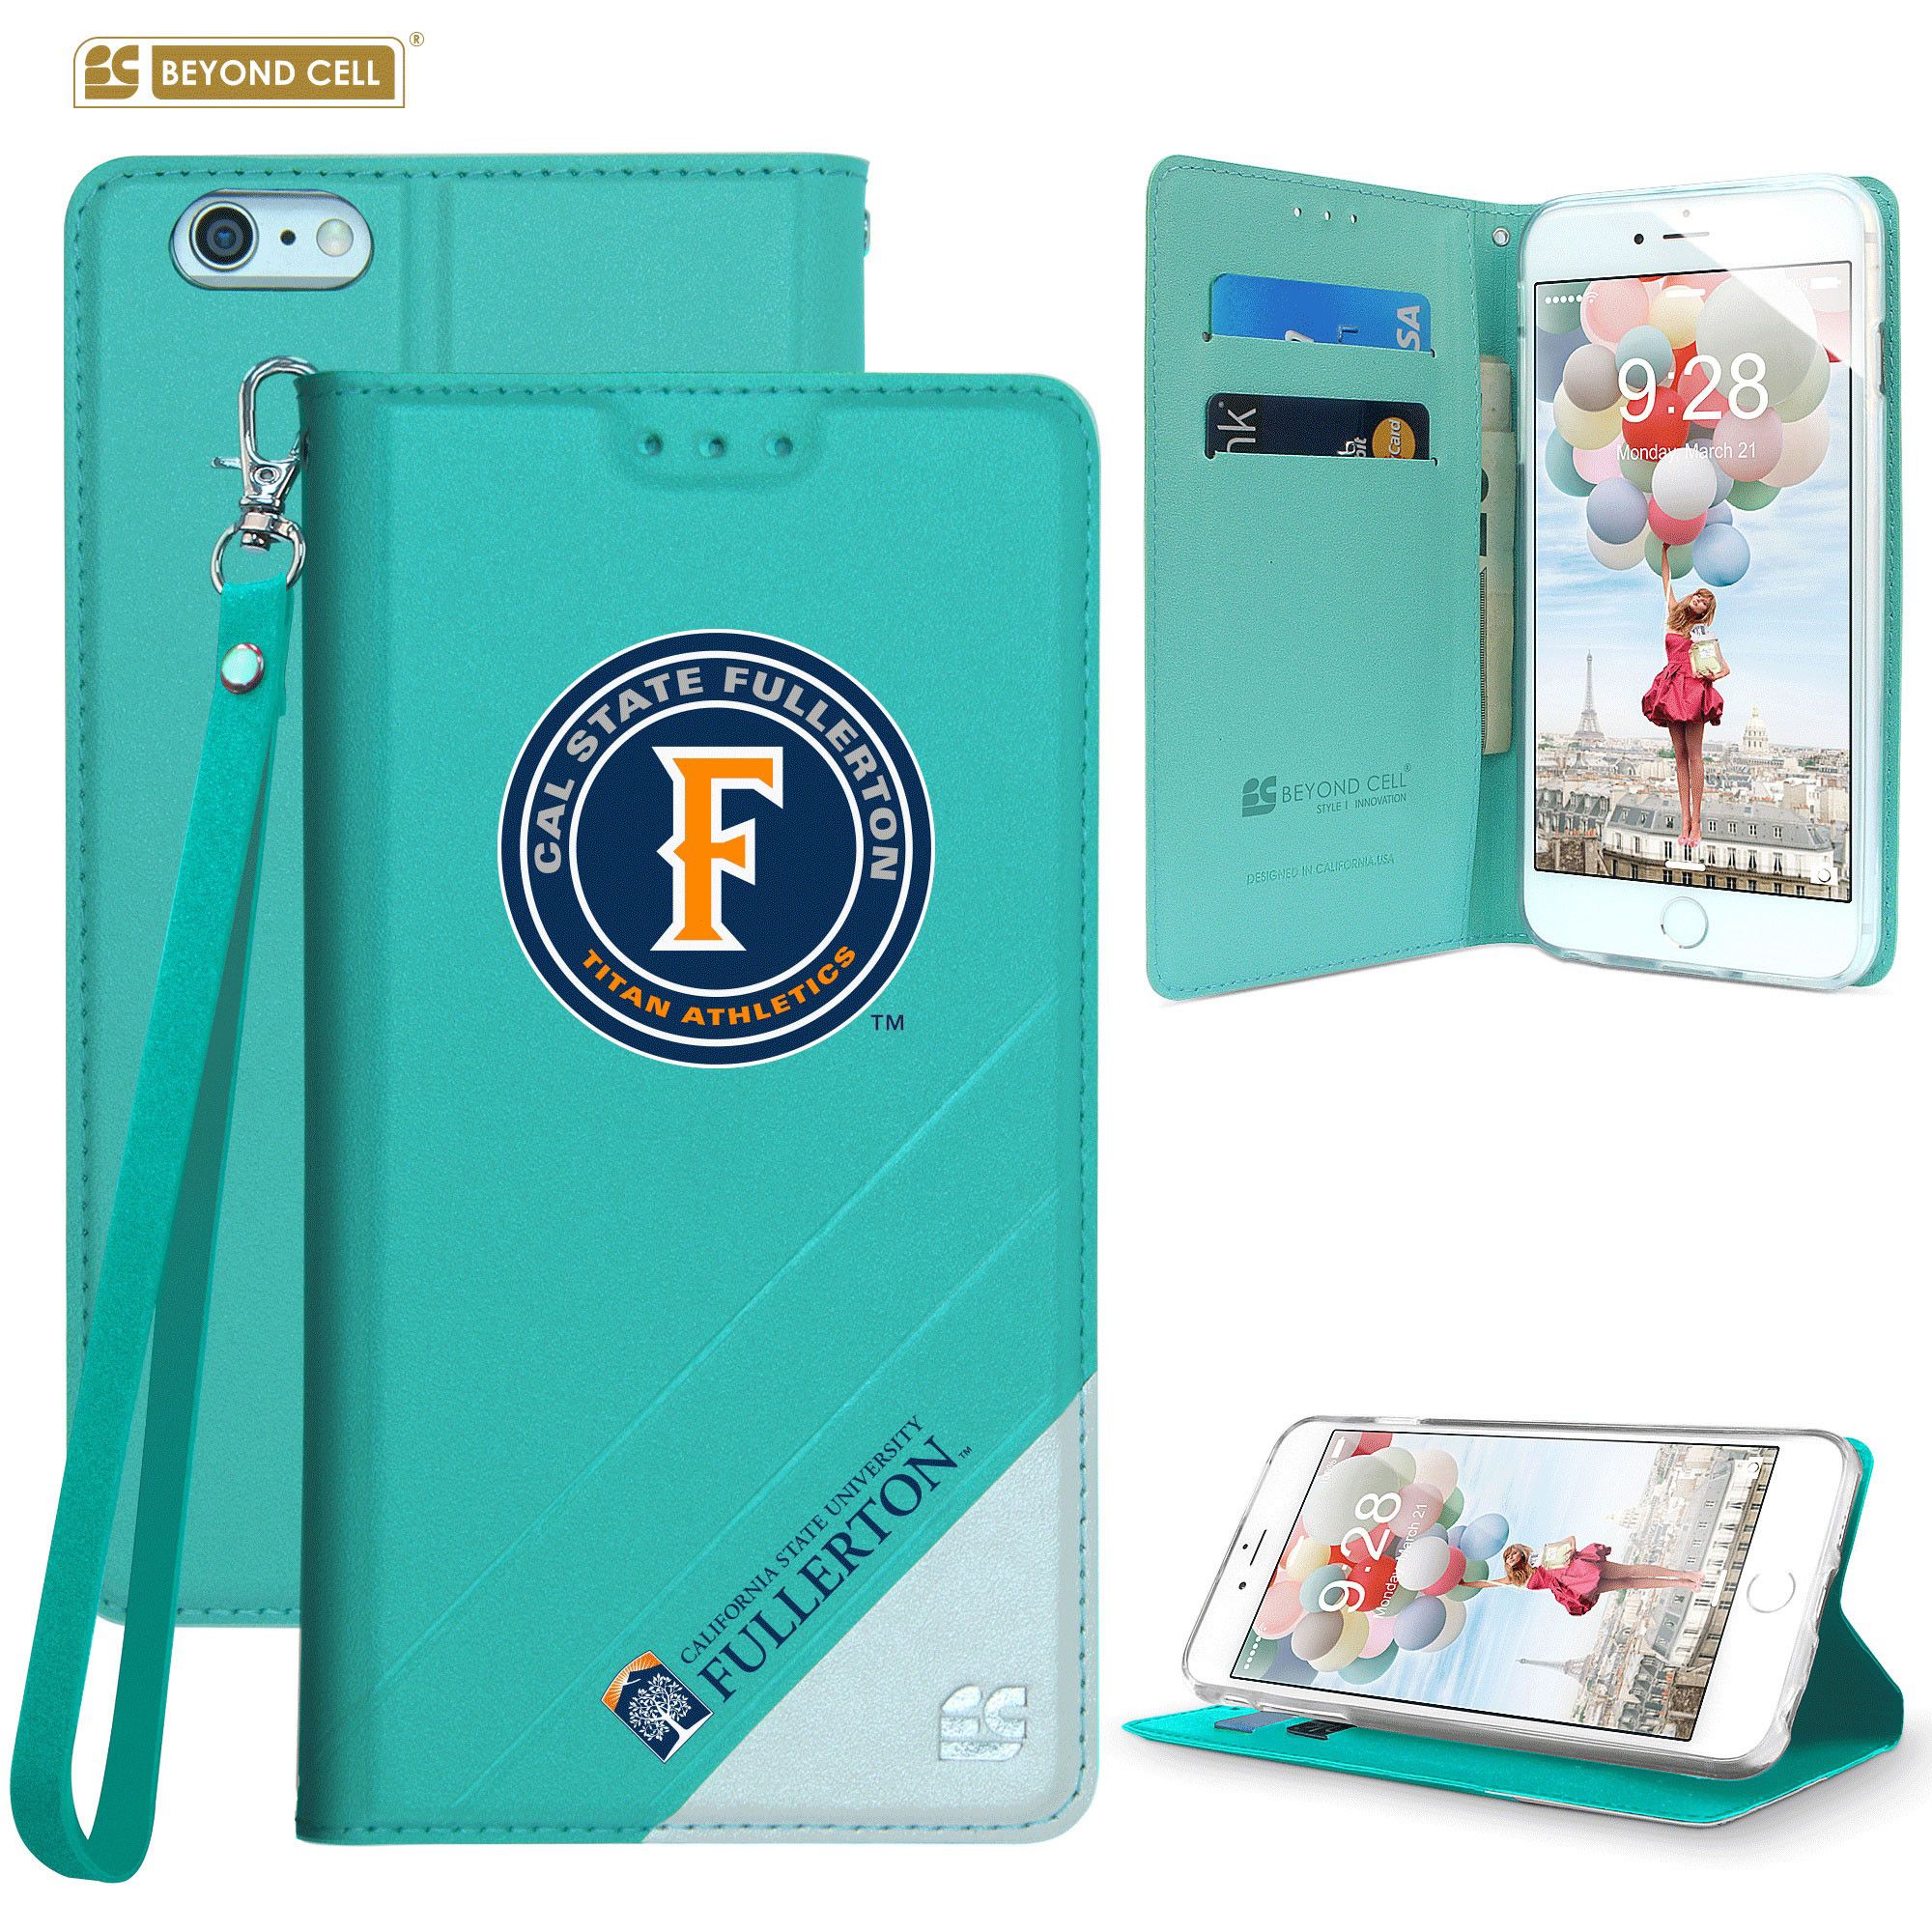 Apple iPhone 6/6s - Licensed Cal State Fullerton Folding Wallet case with card slots and wristlet, Teal